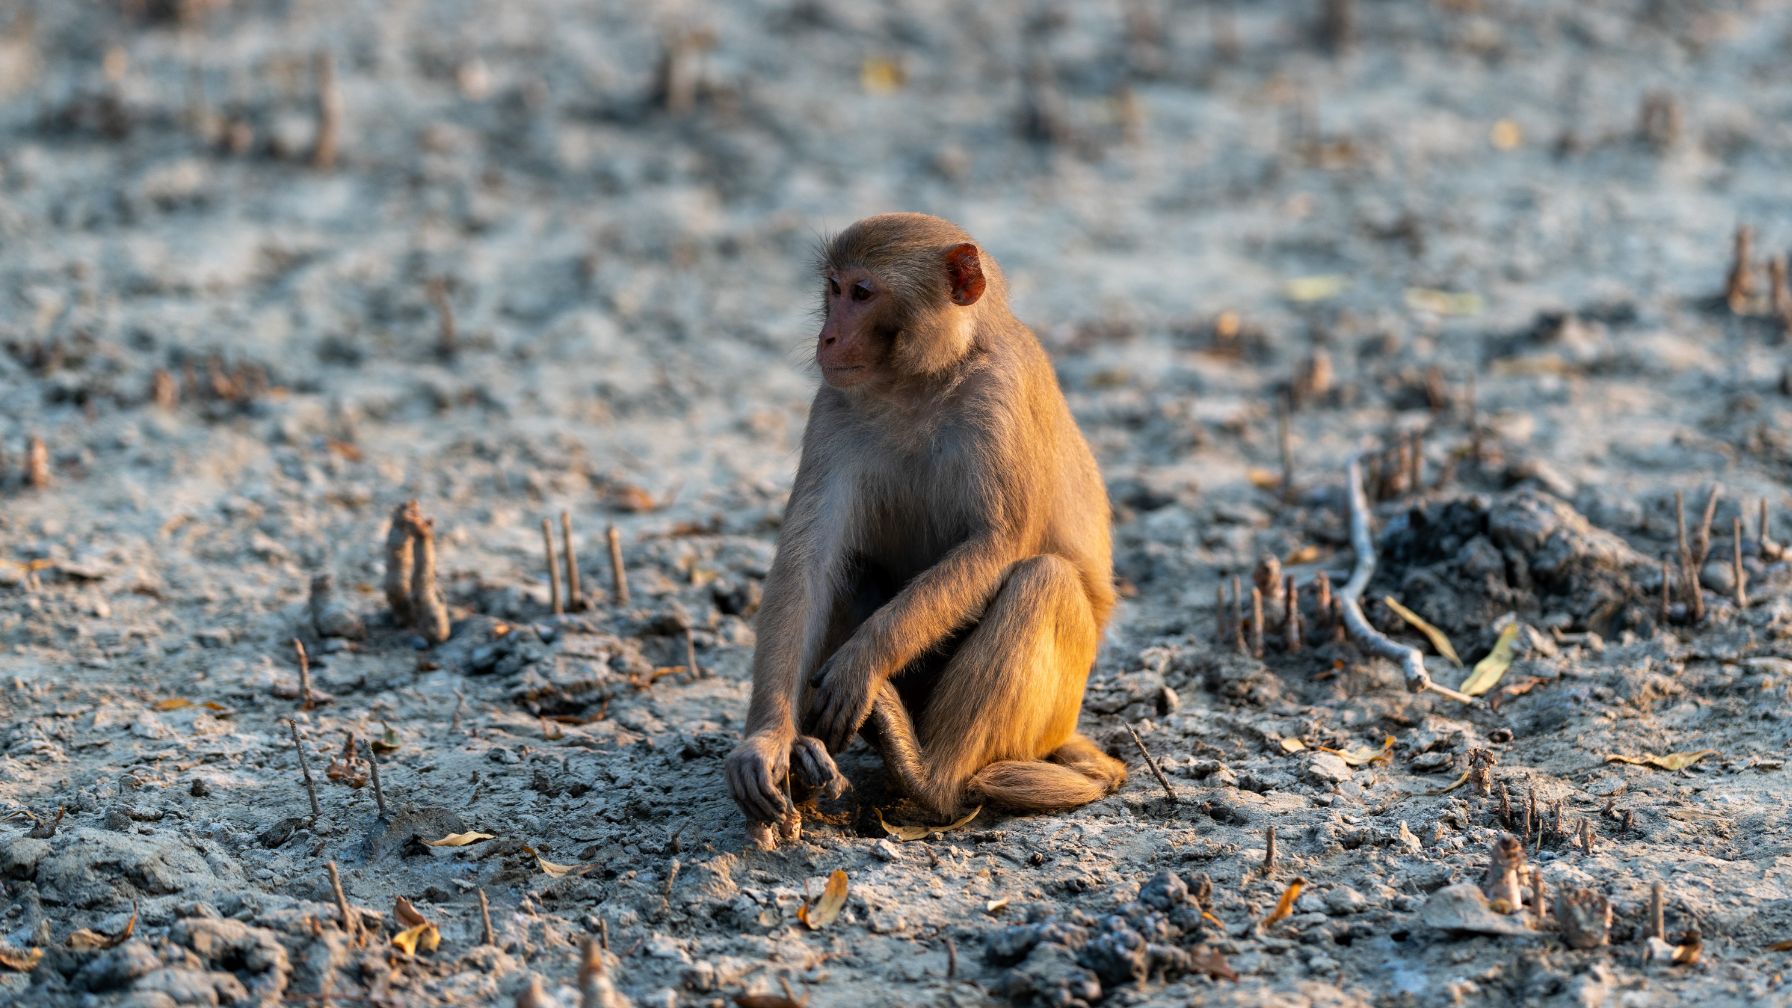 This special archipelago on the Bay of Bengal is home to a wide variety of wildlife. Some animals are less shy than others: Rhesus macaques can often be spotted among the aerial roots of the mangroves. © Tapash Paul/GIZ